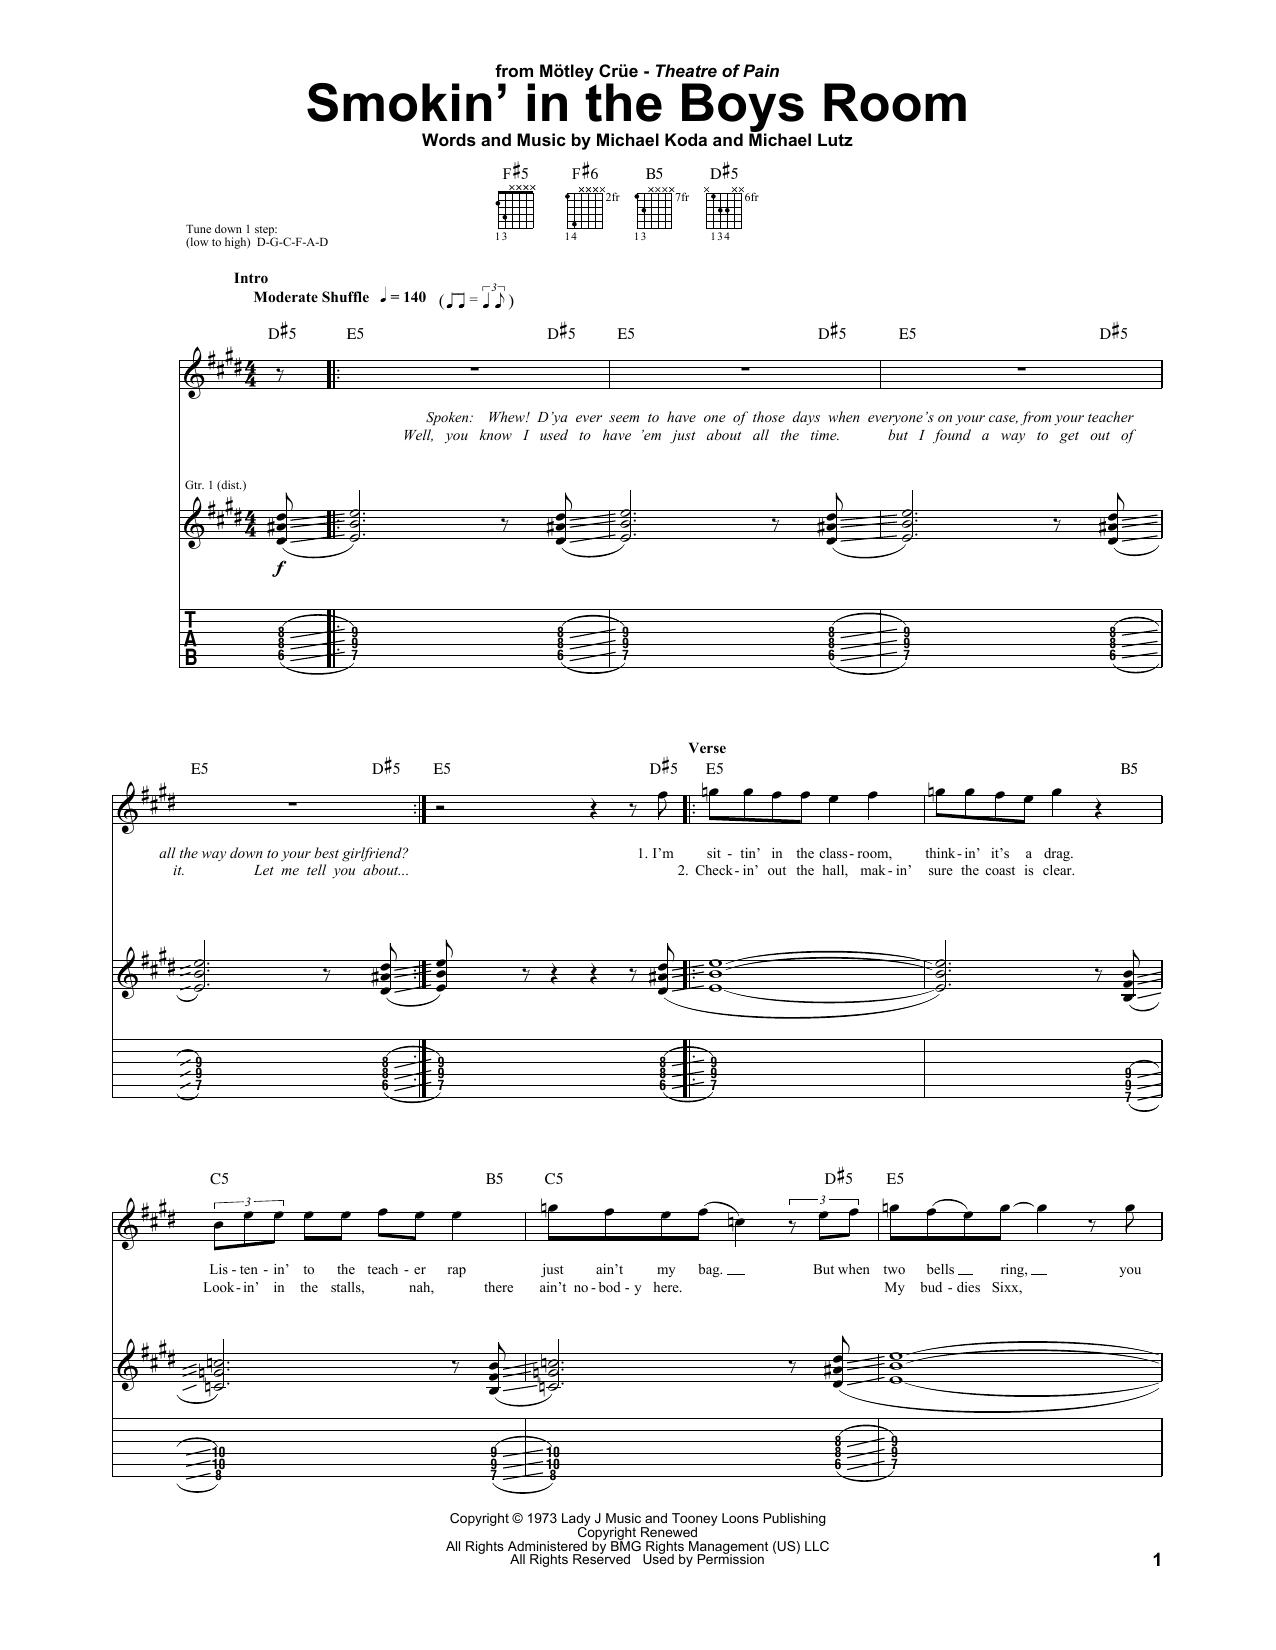 Motley Crue Smokin' In The Boys Room sheet music notes and chords. Download Printable PDF.